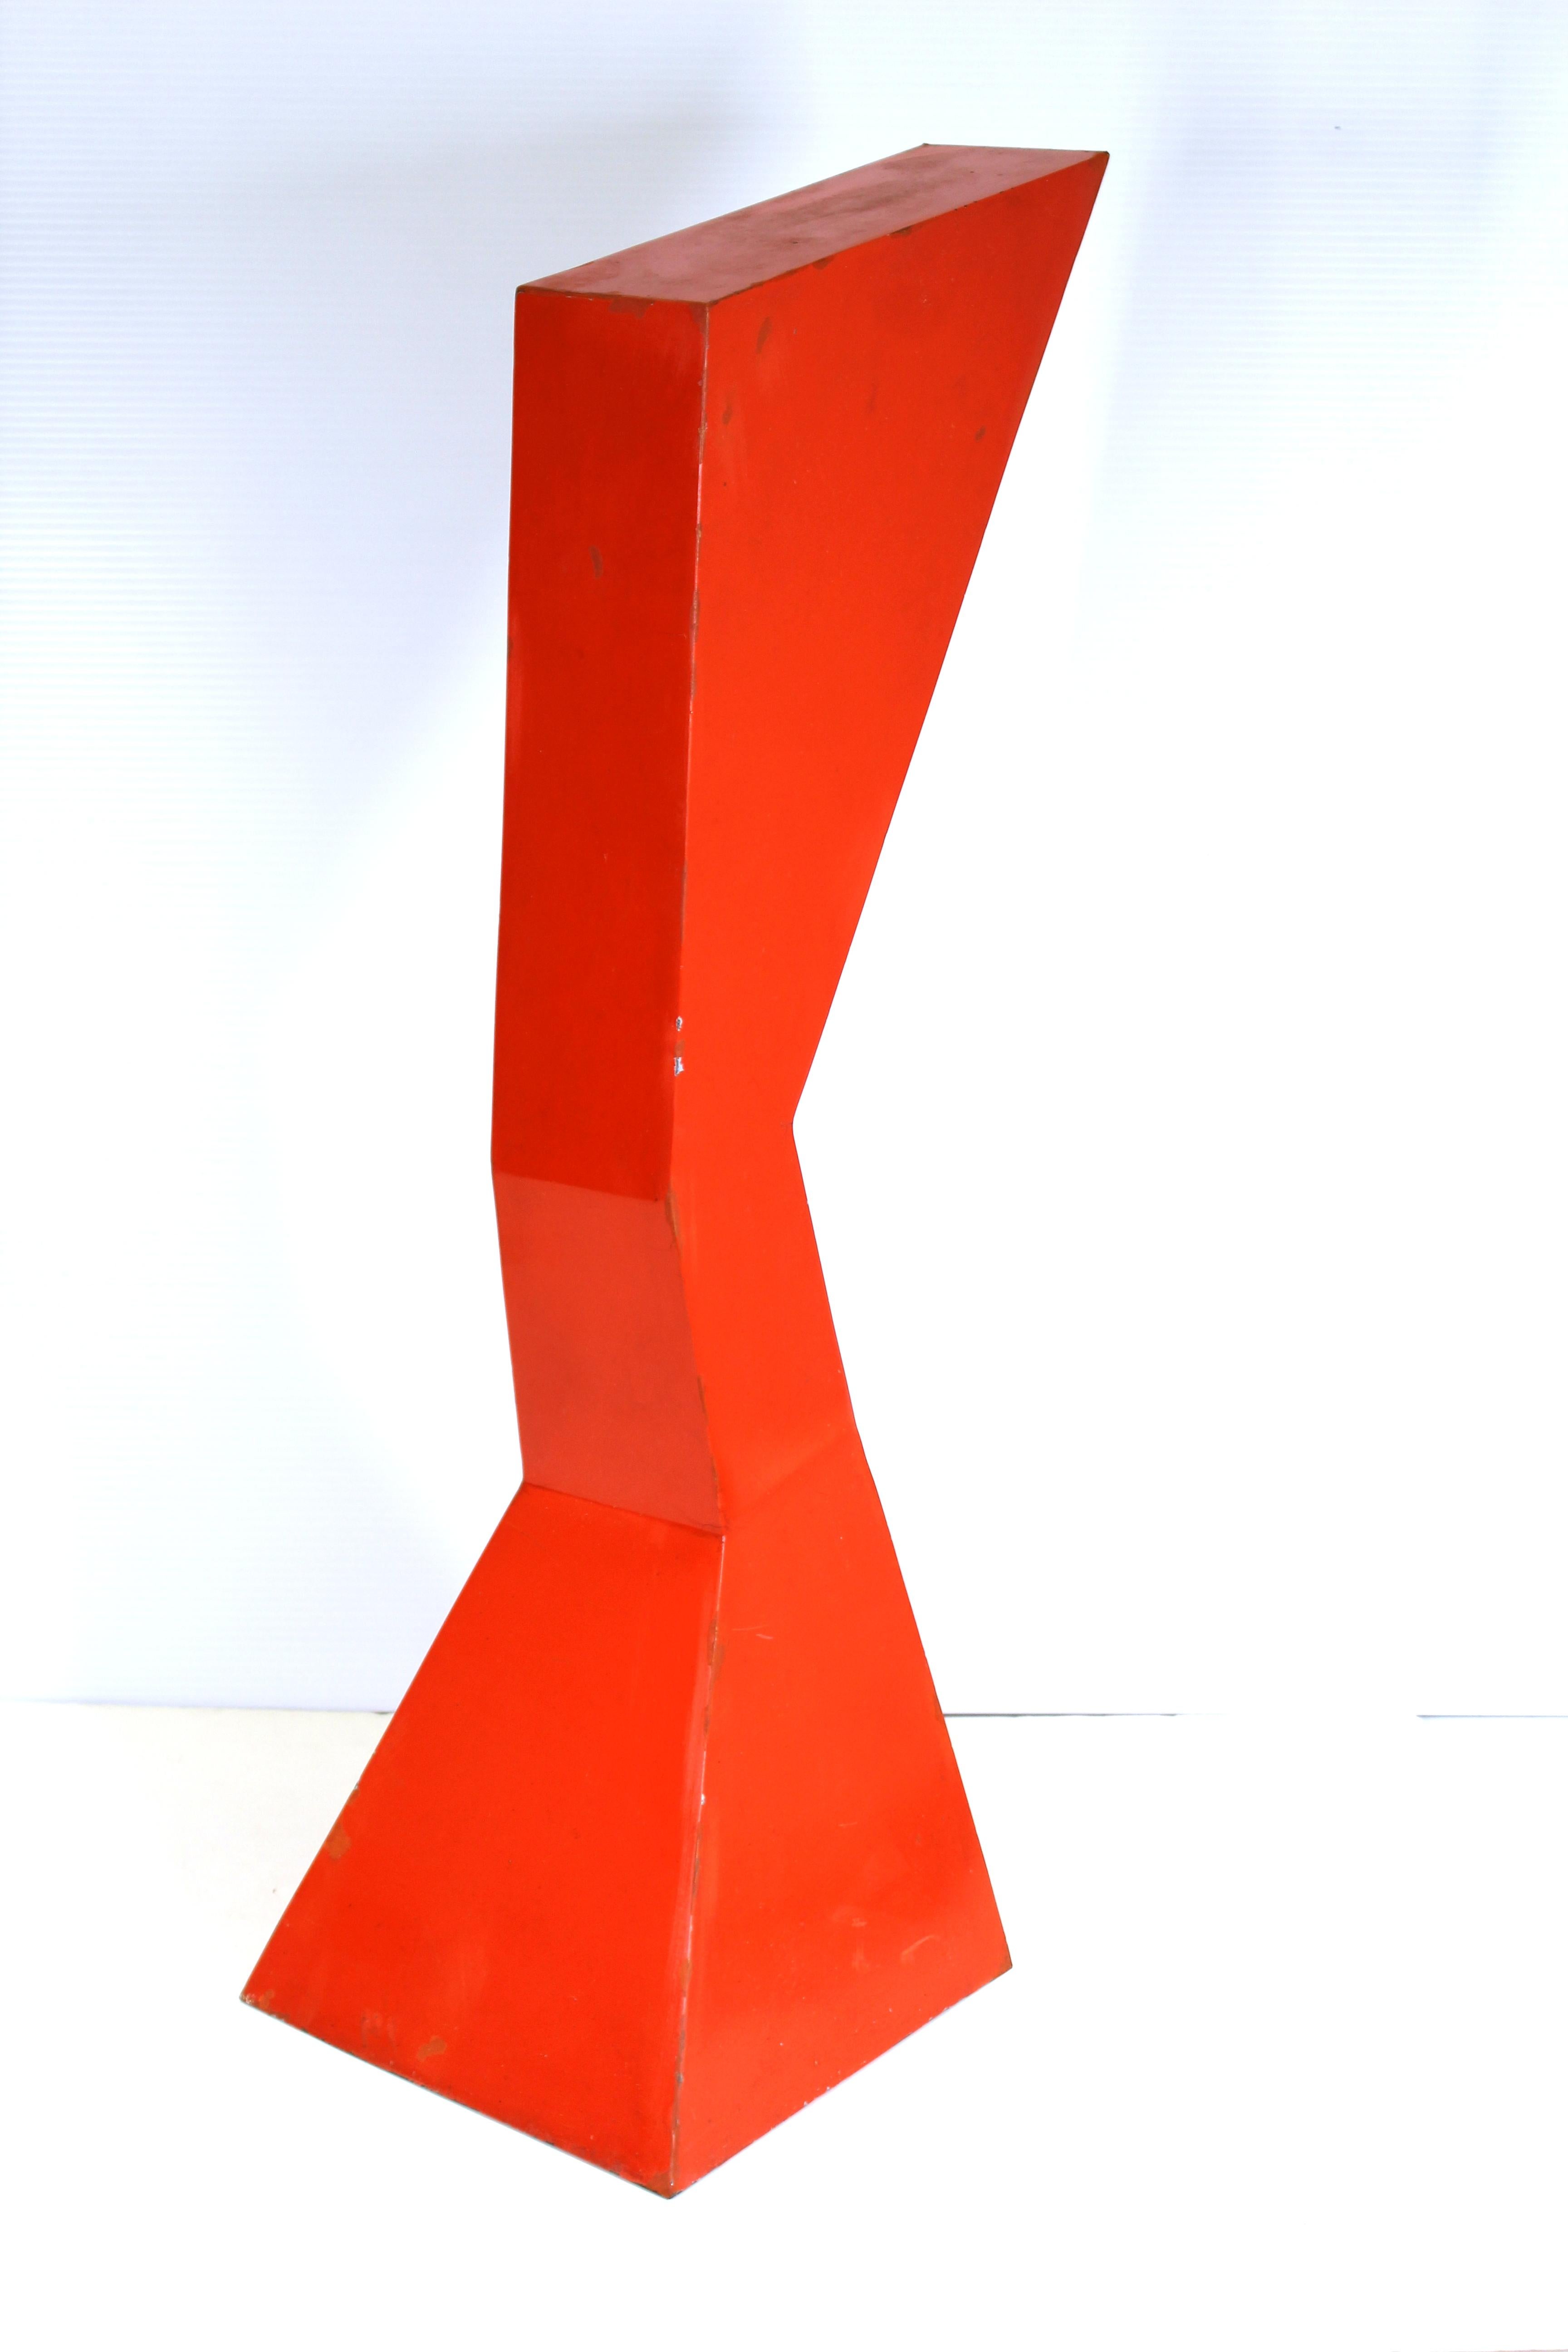 American Modern Abstract Red Enameled Metal Sculpture